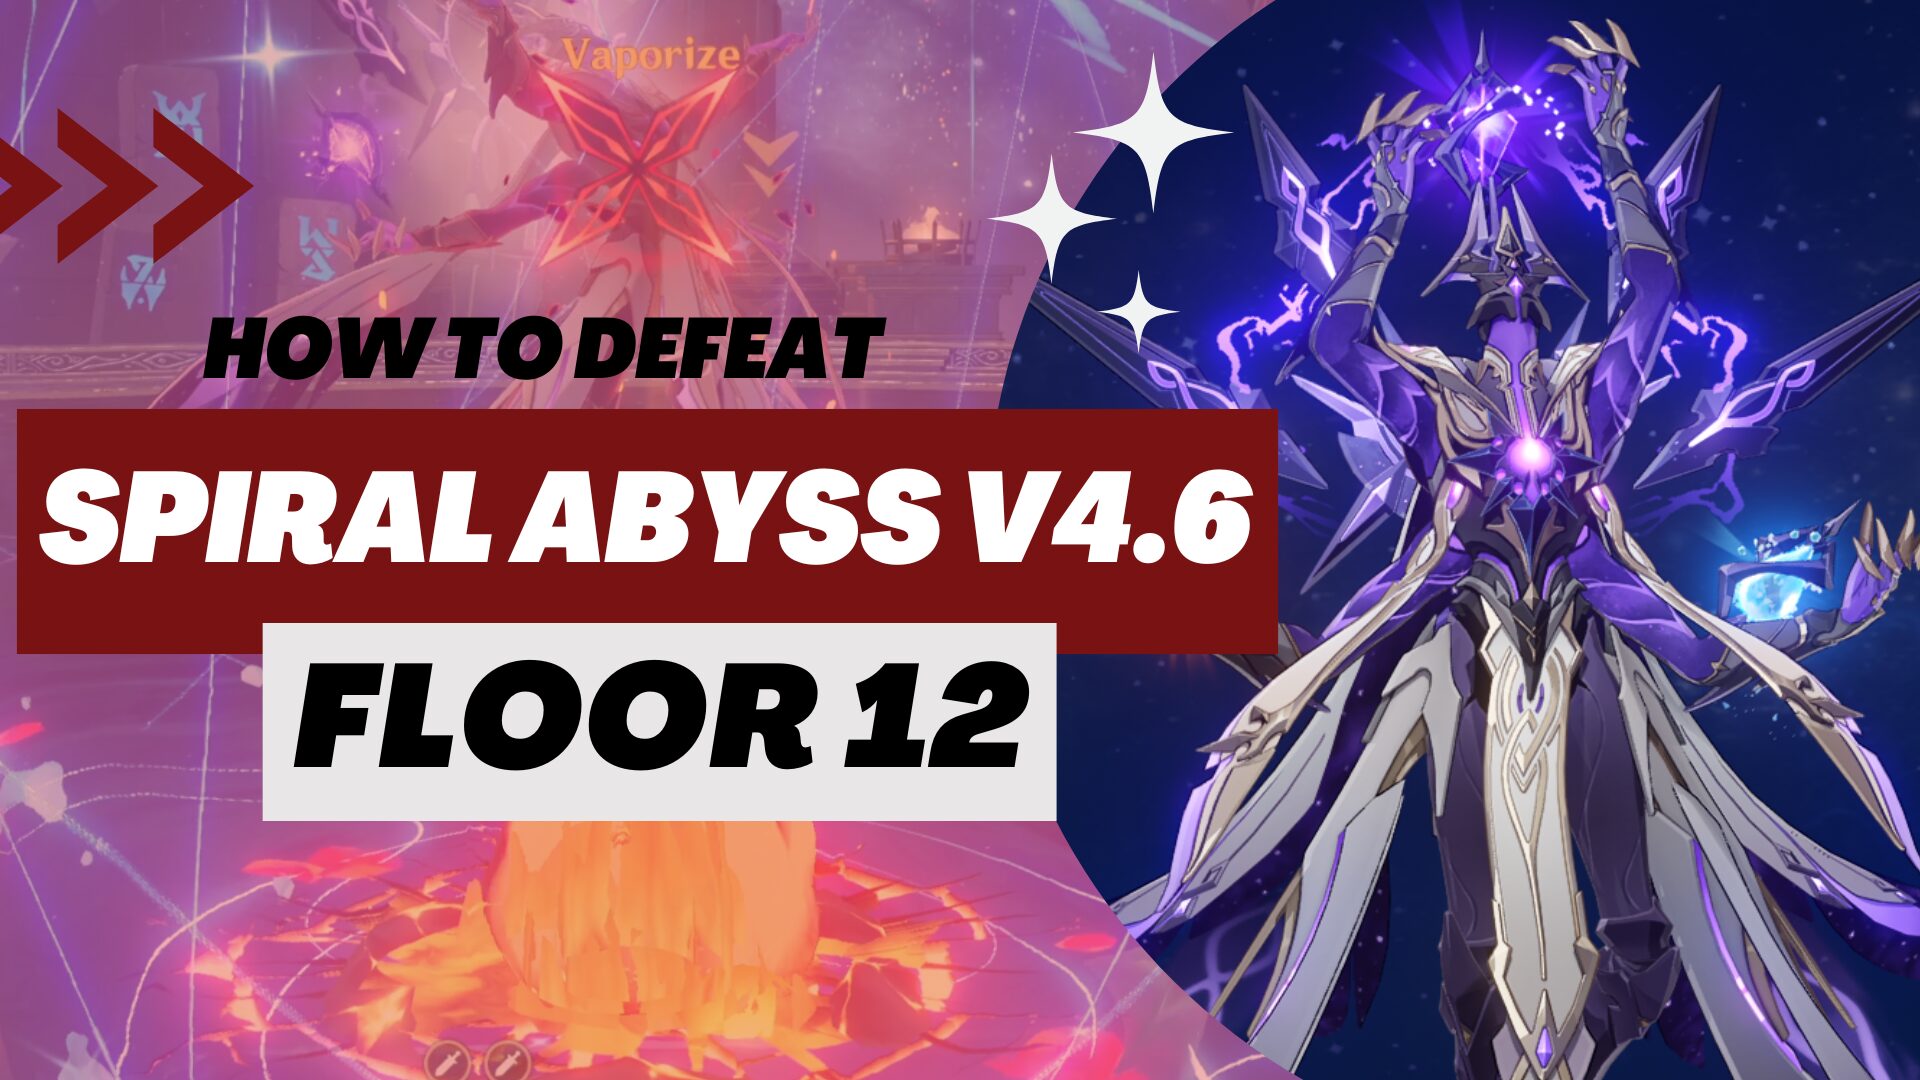 Genshin Impact: Spiral Abyss V4.6 Floor 12 Complete Guide